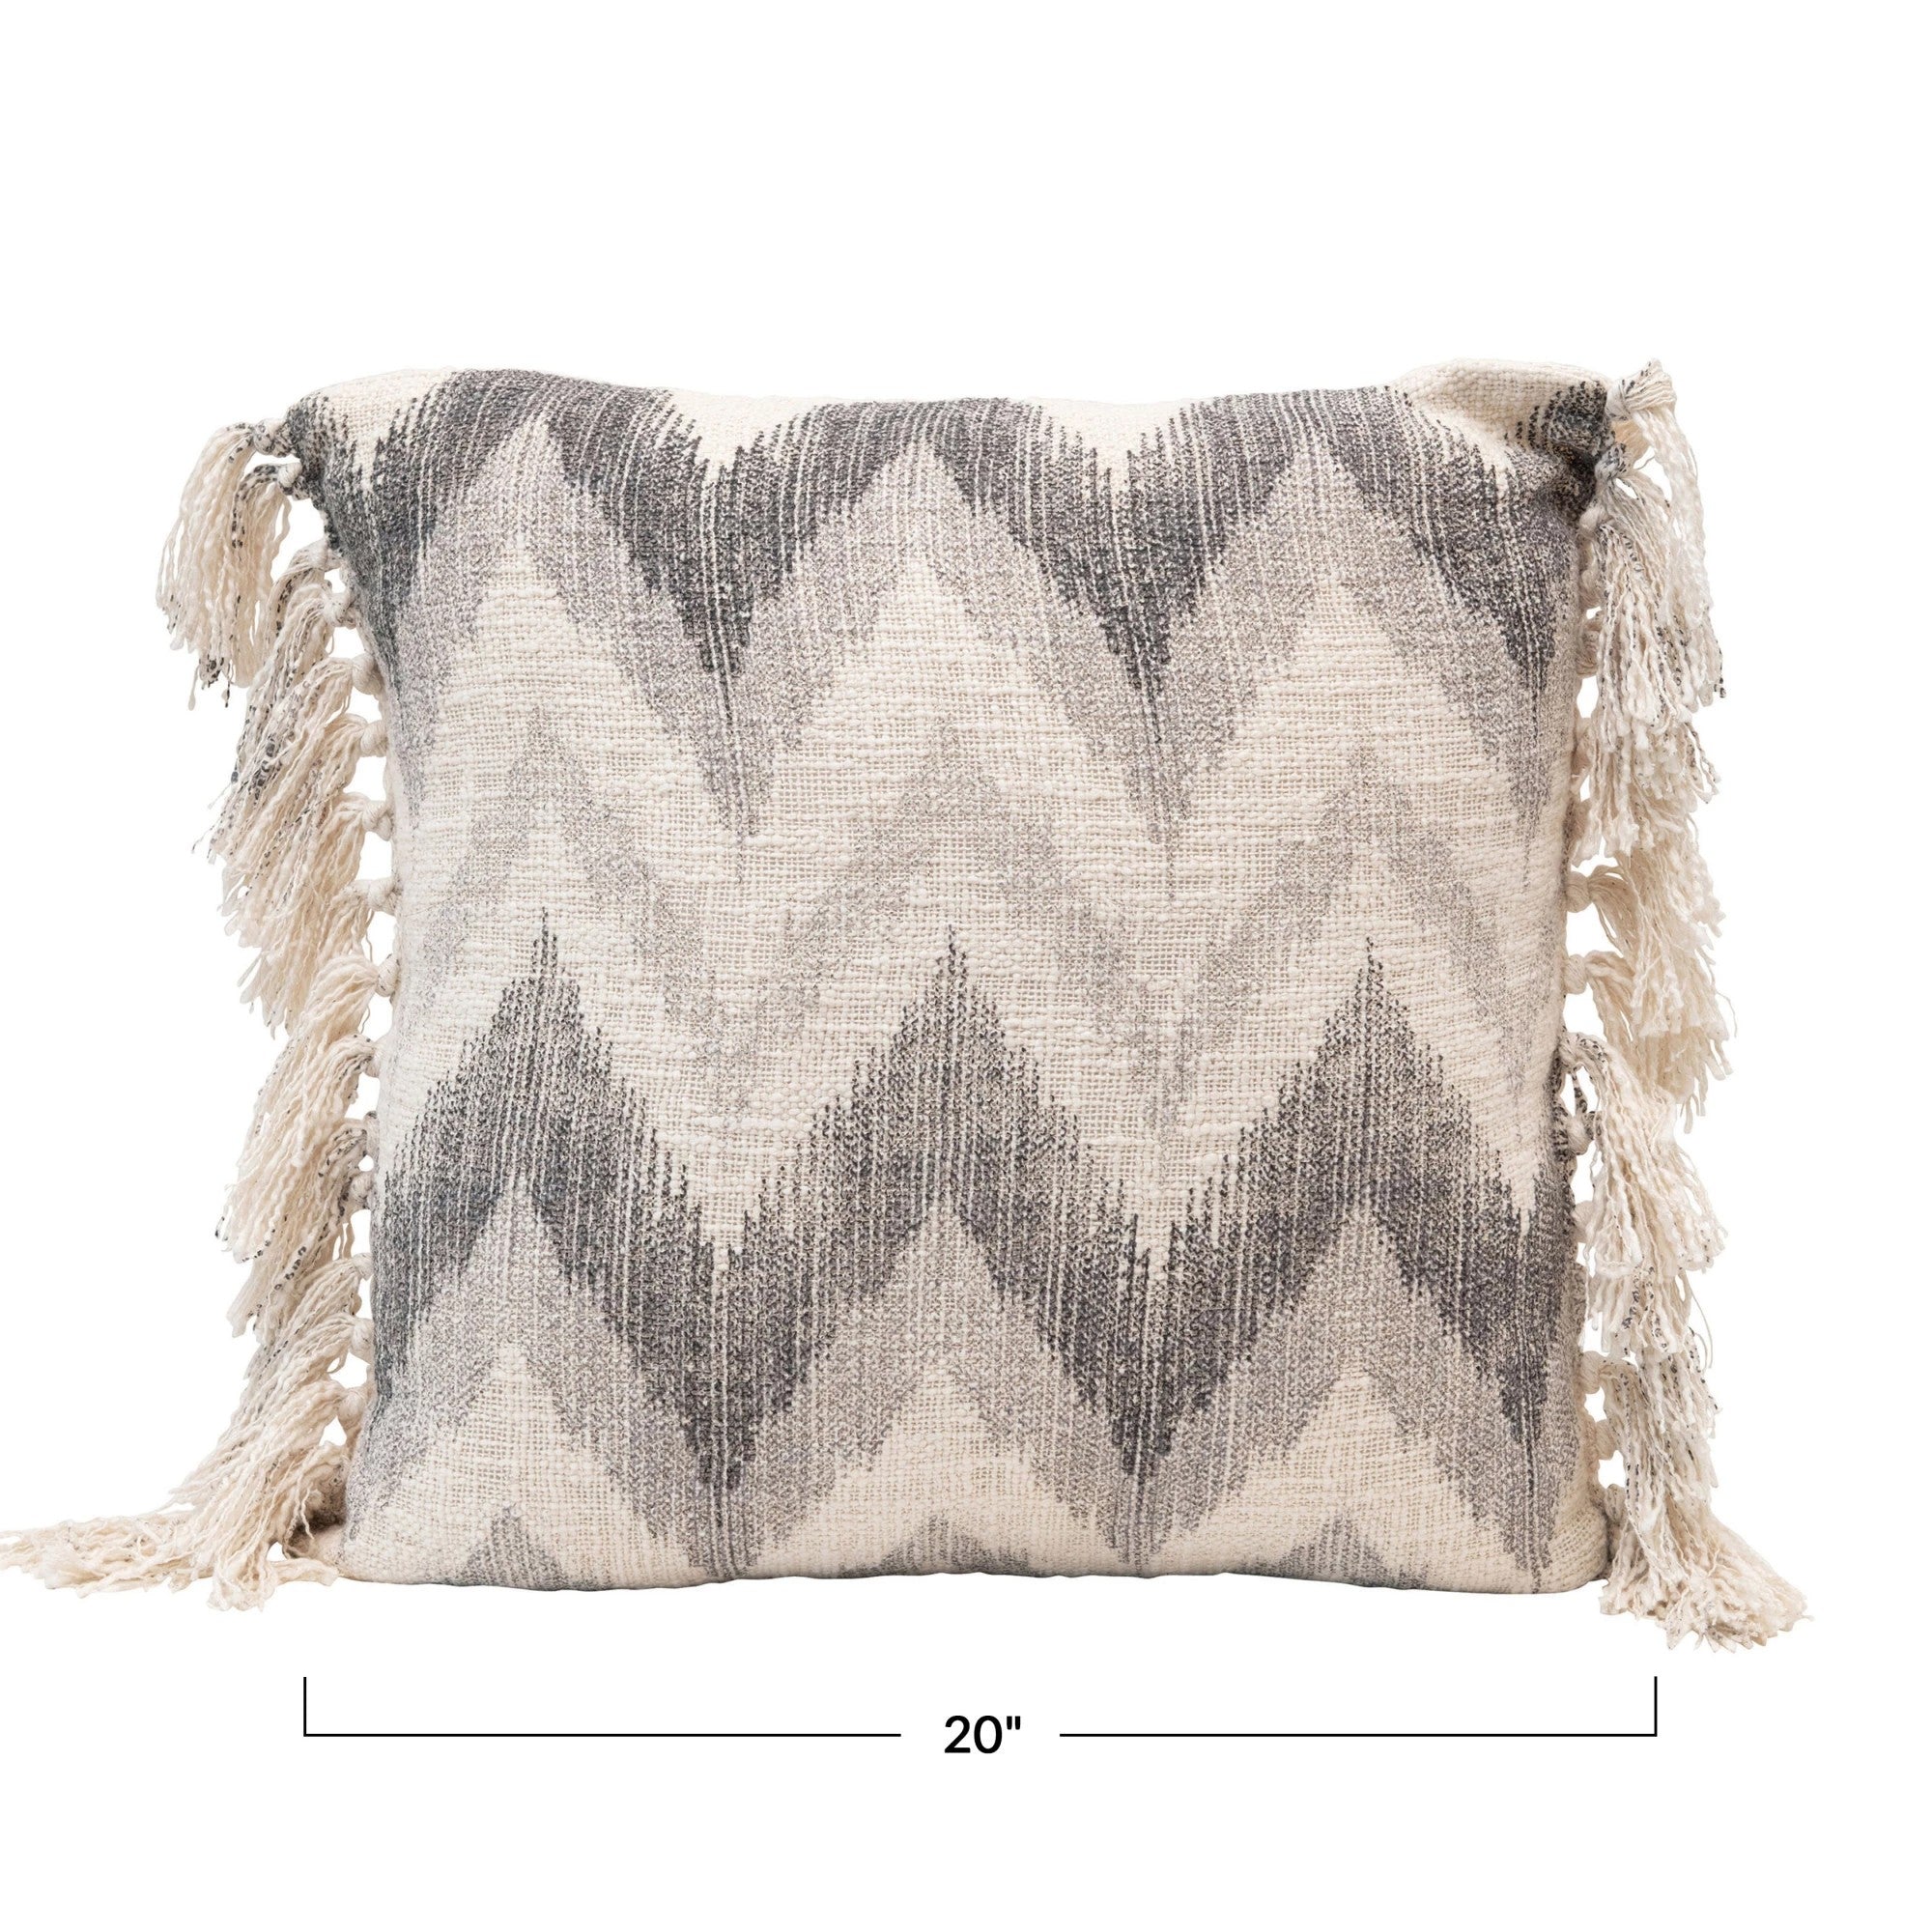 Stonewashed Pillow with Chevron Print and Tassels